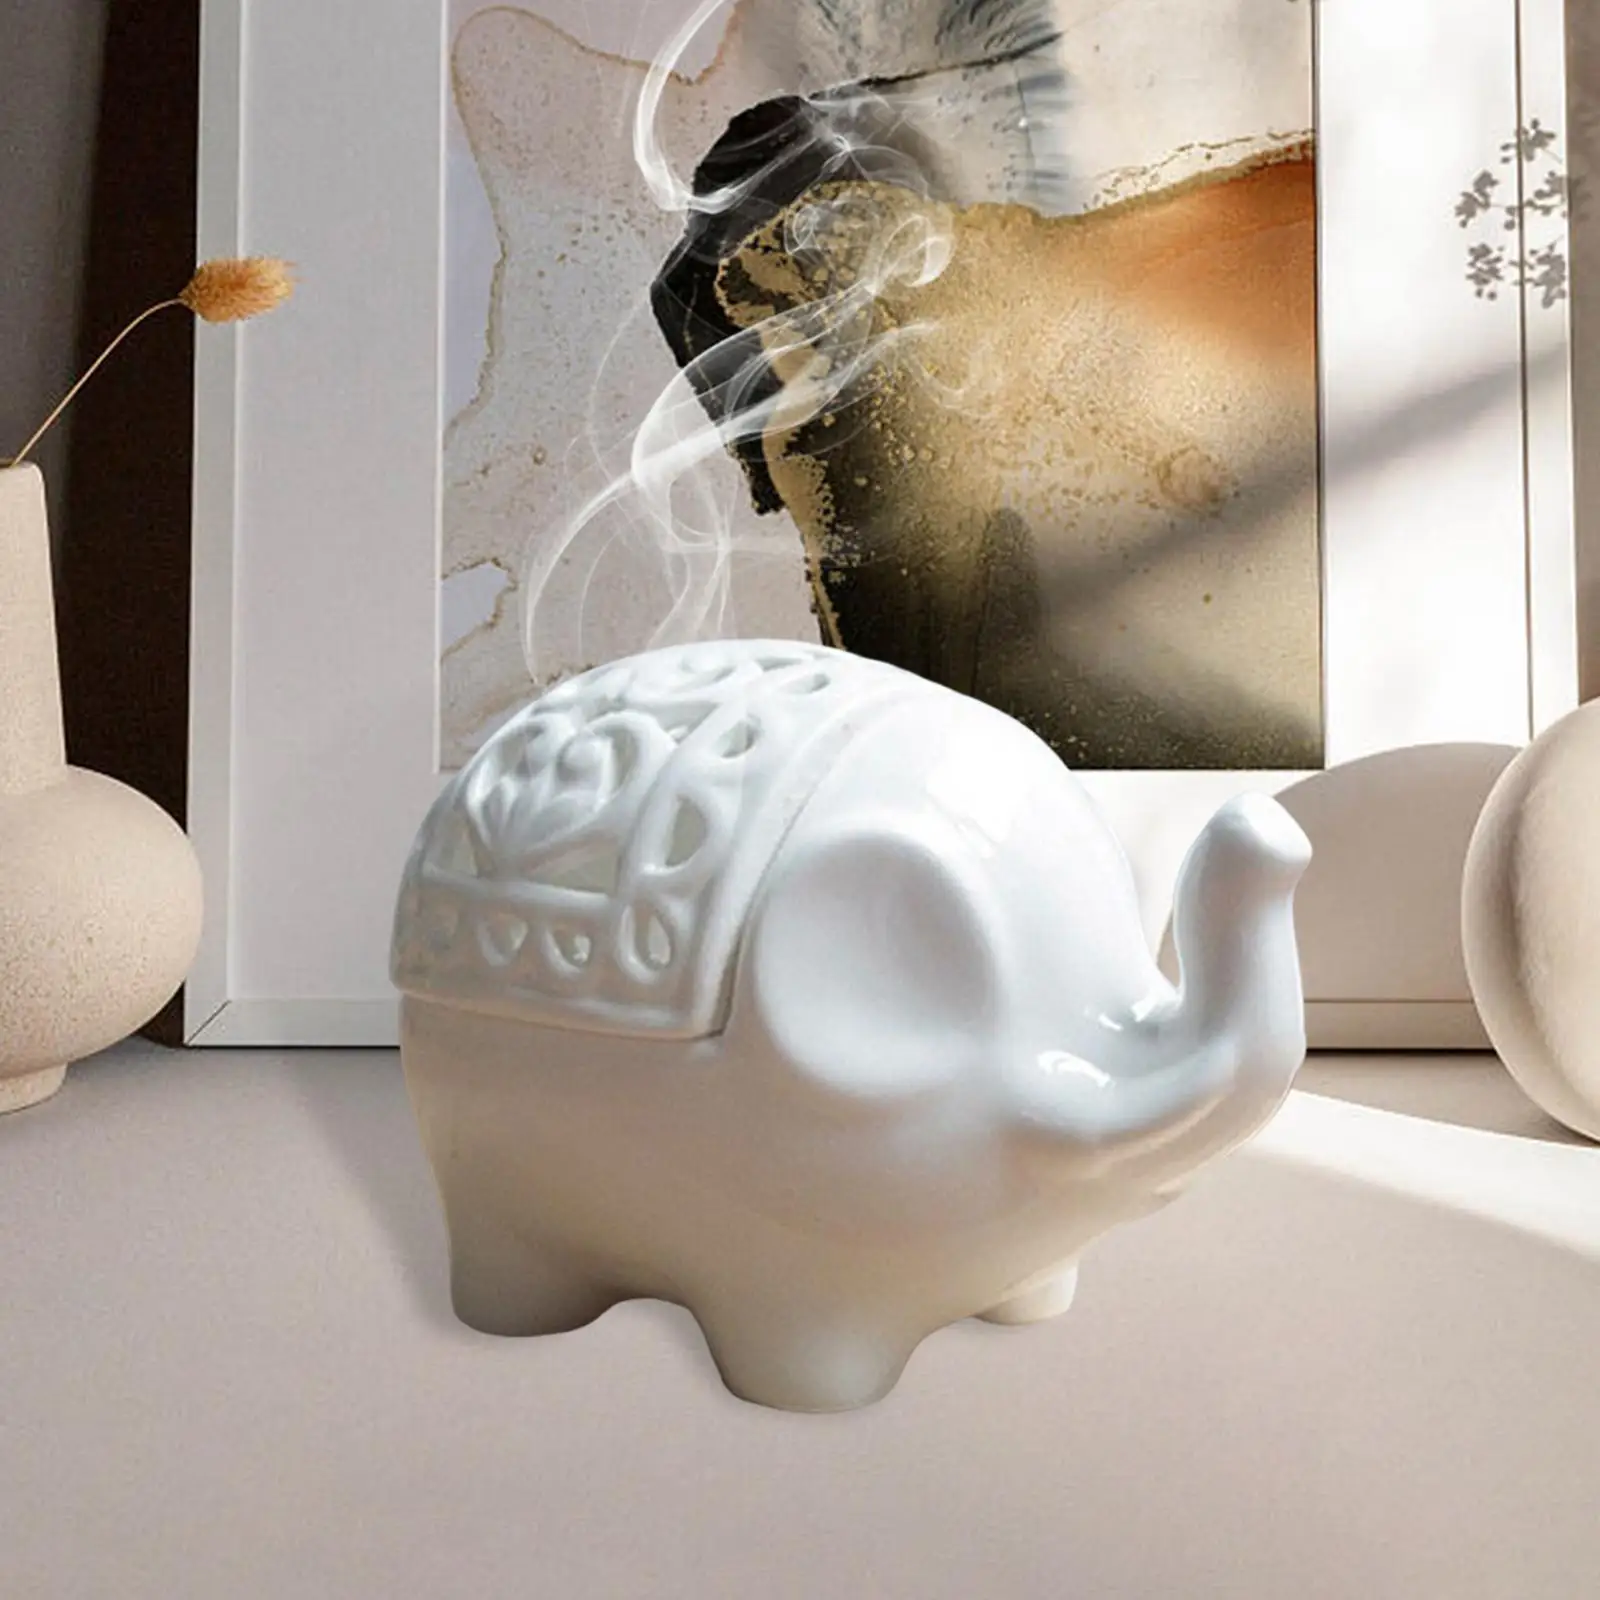 Cute Elephant Shape Candle Holder Ornament Tealight Holder Candlestick for Cafe Bedroom Table Centerpiece Ornament